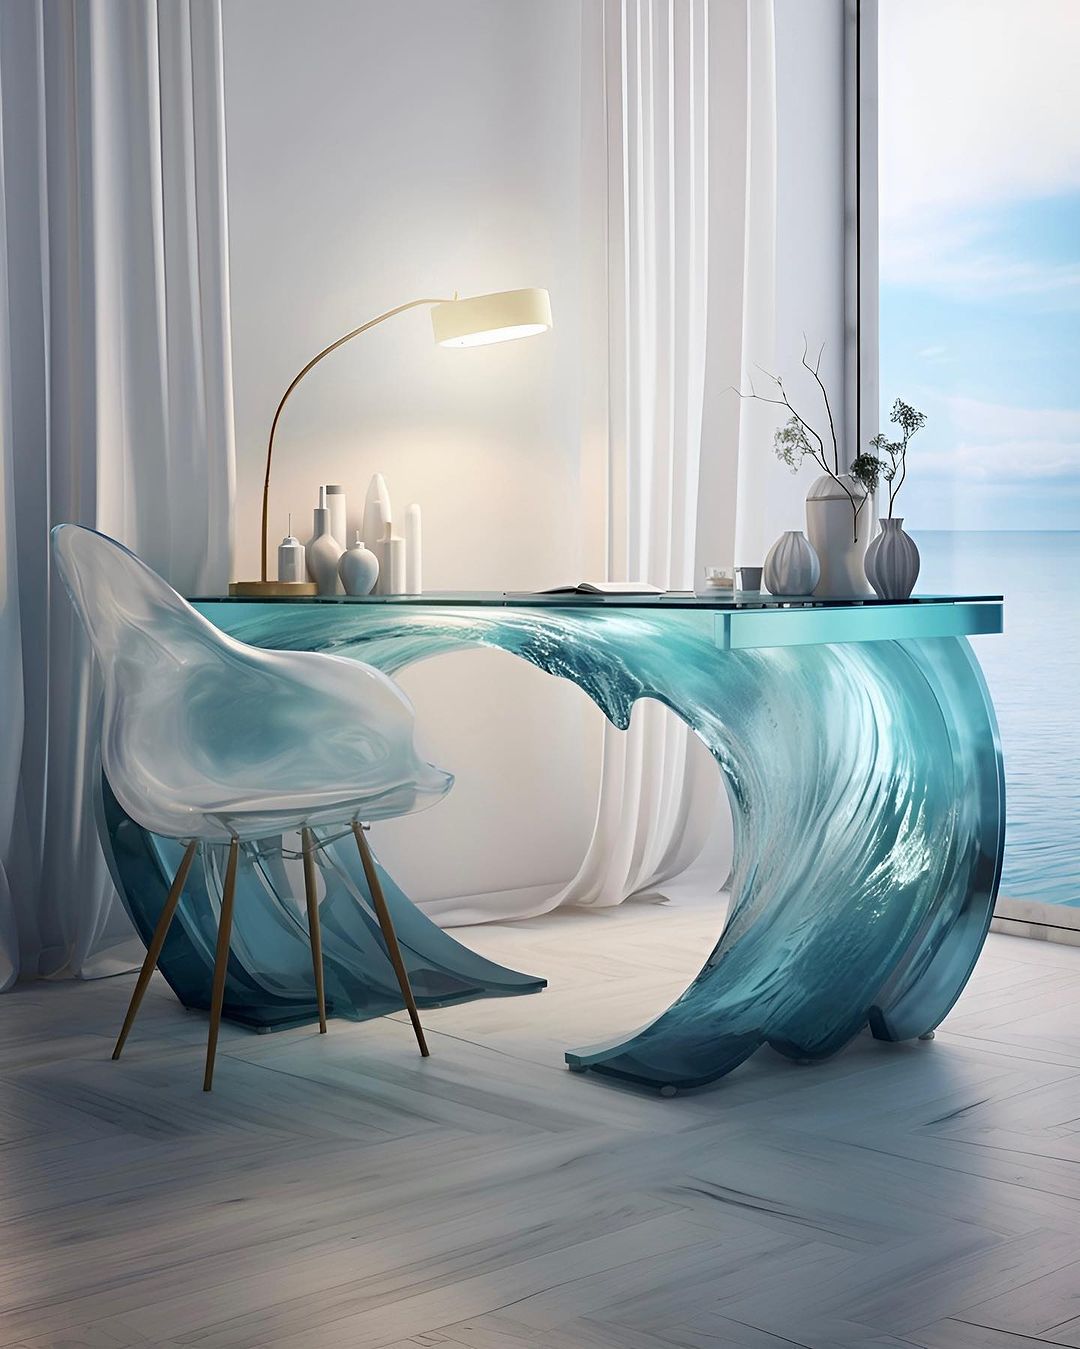 The Work Desk Takes Inspiration from the Rhythmic Patterns of Ocean Waves